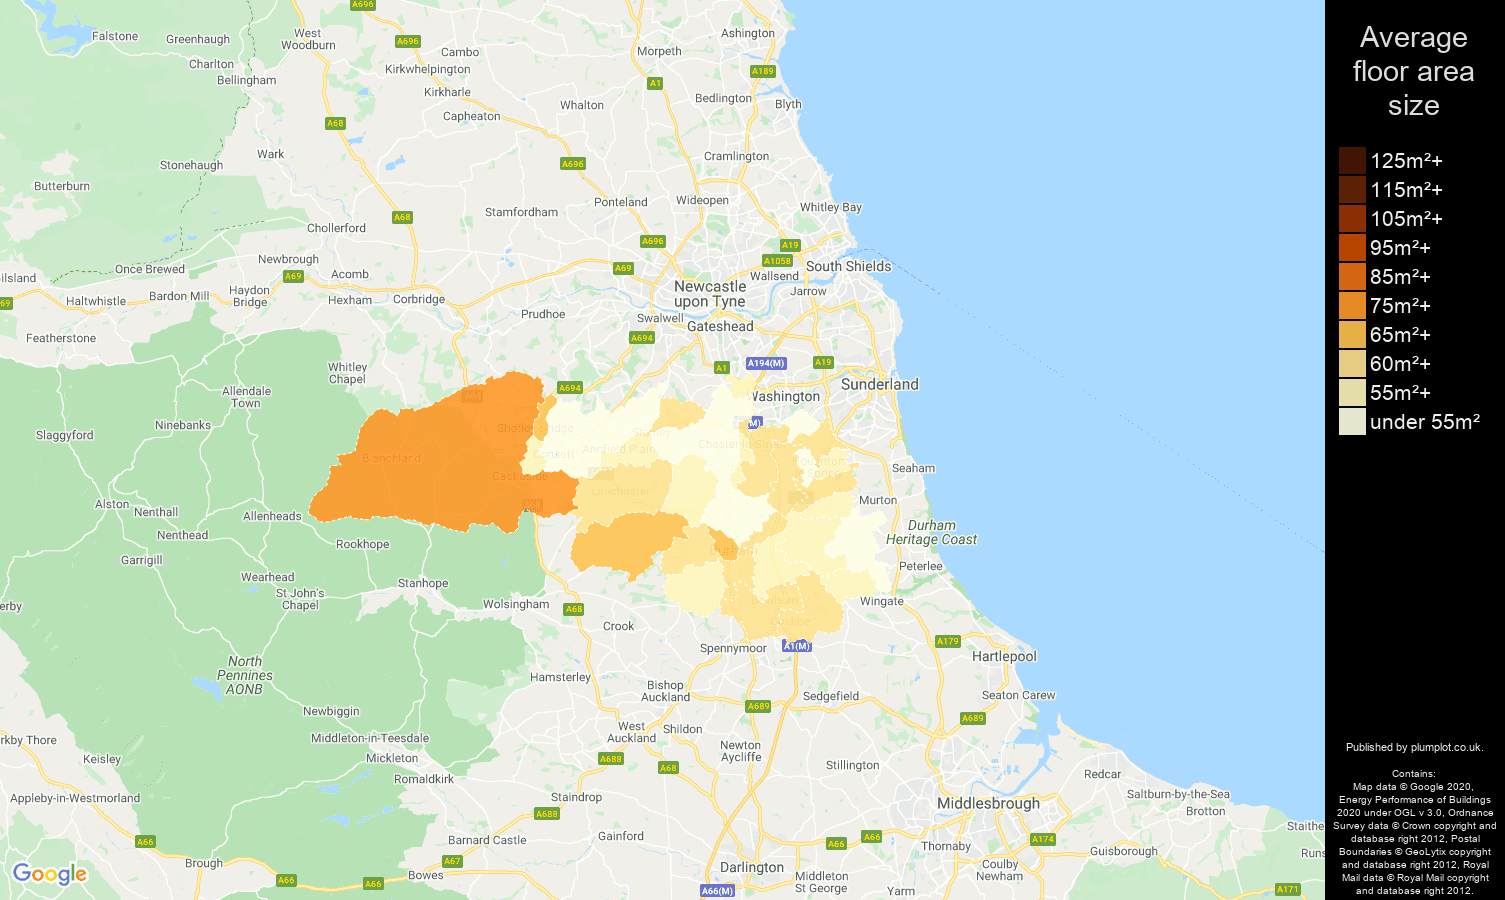 Durham map of average floor area size of flats